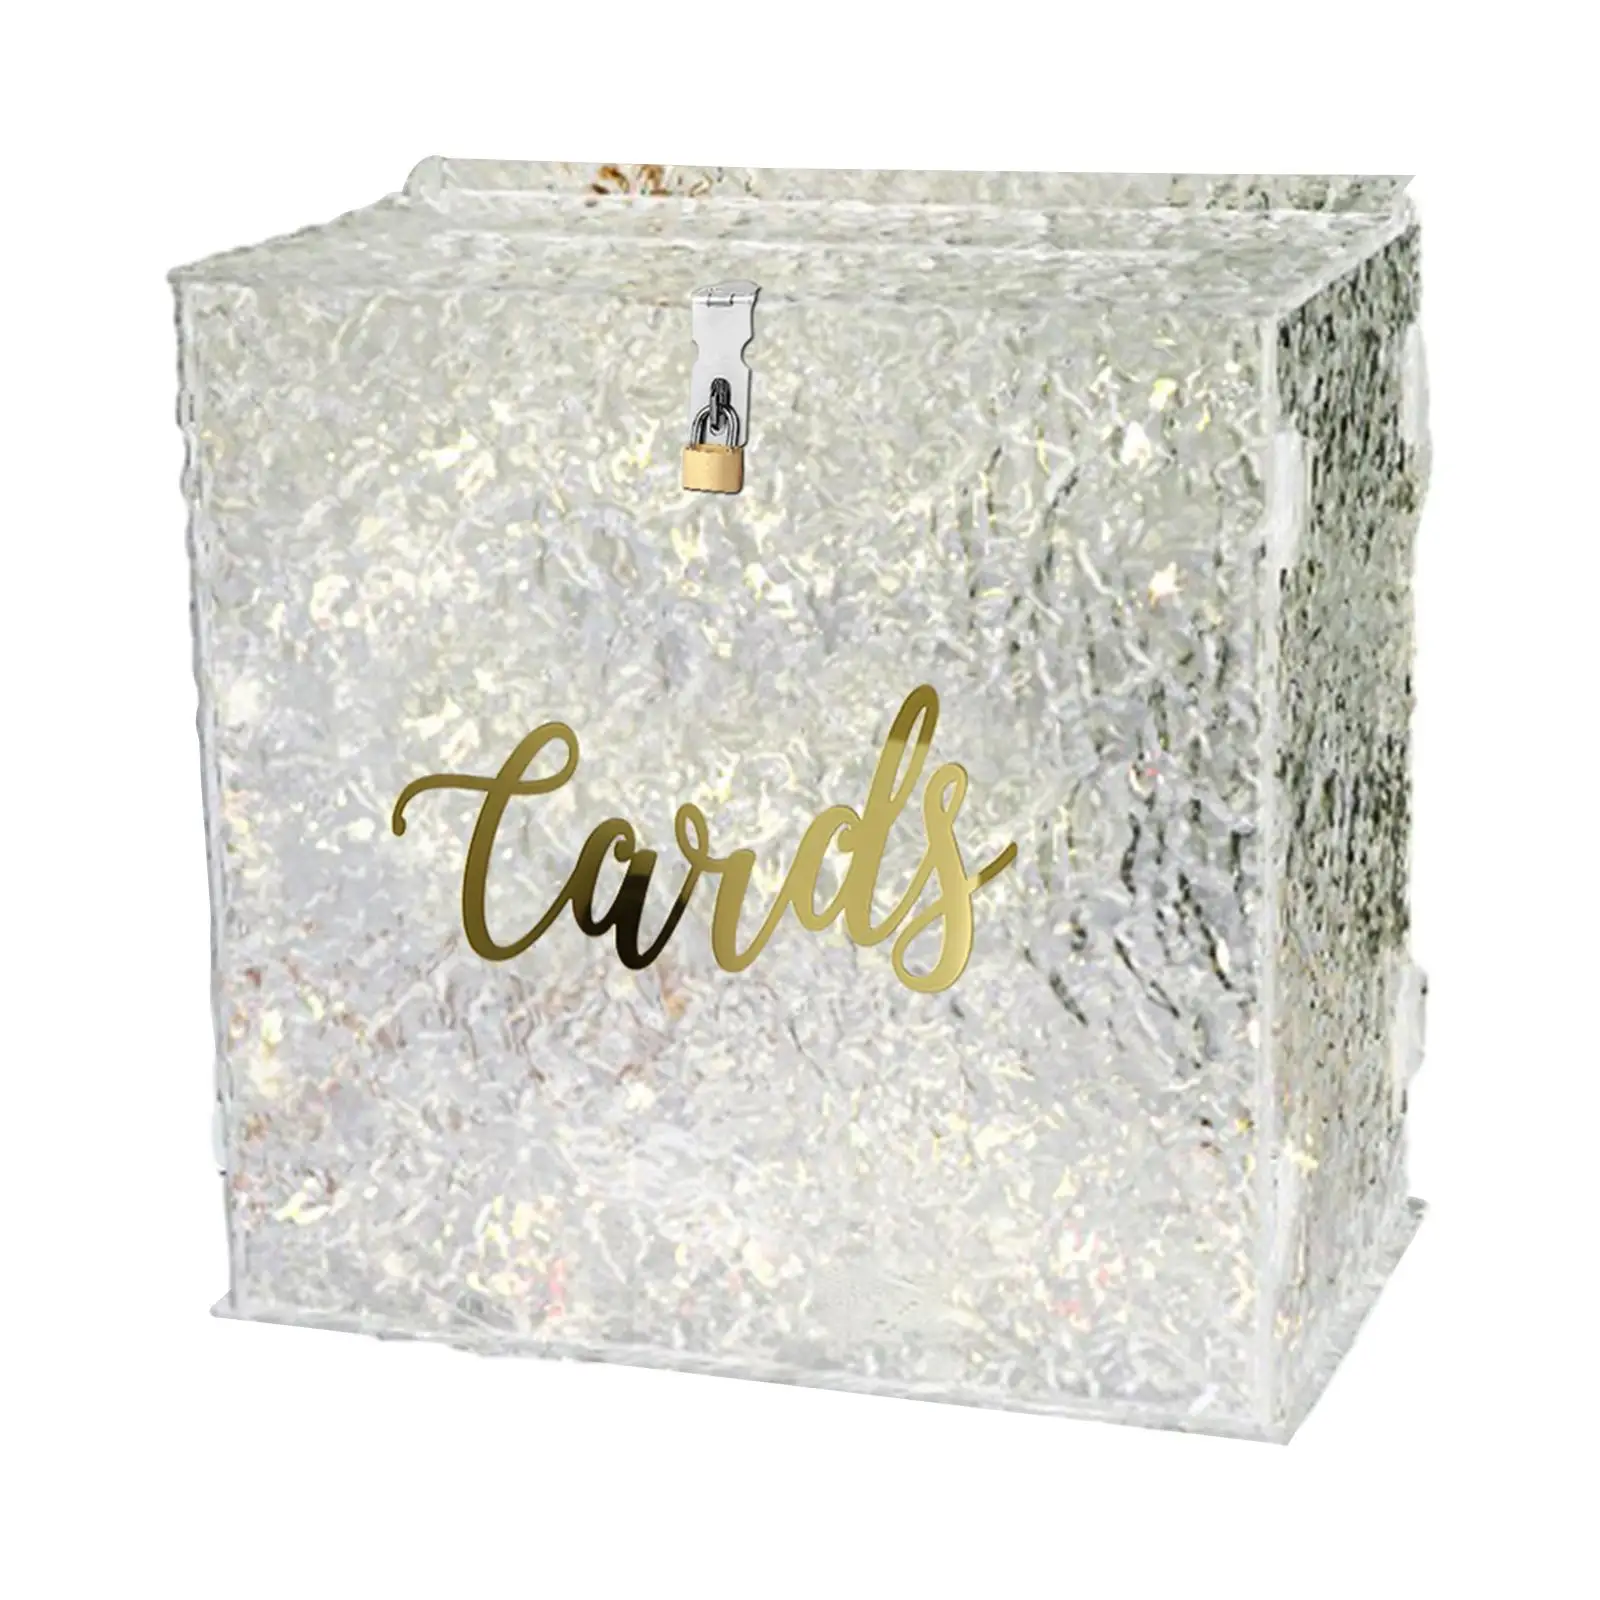 Wedding Envelope Boxes Party Favors Acrylic Wedding Cards Box Envelop Card Box for Party Wedding Anniversary Birthday Decoration